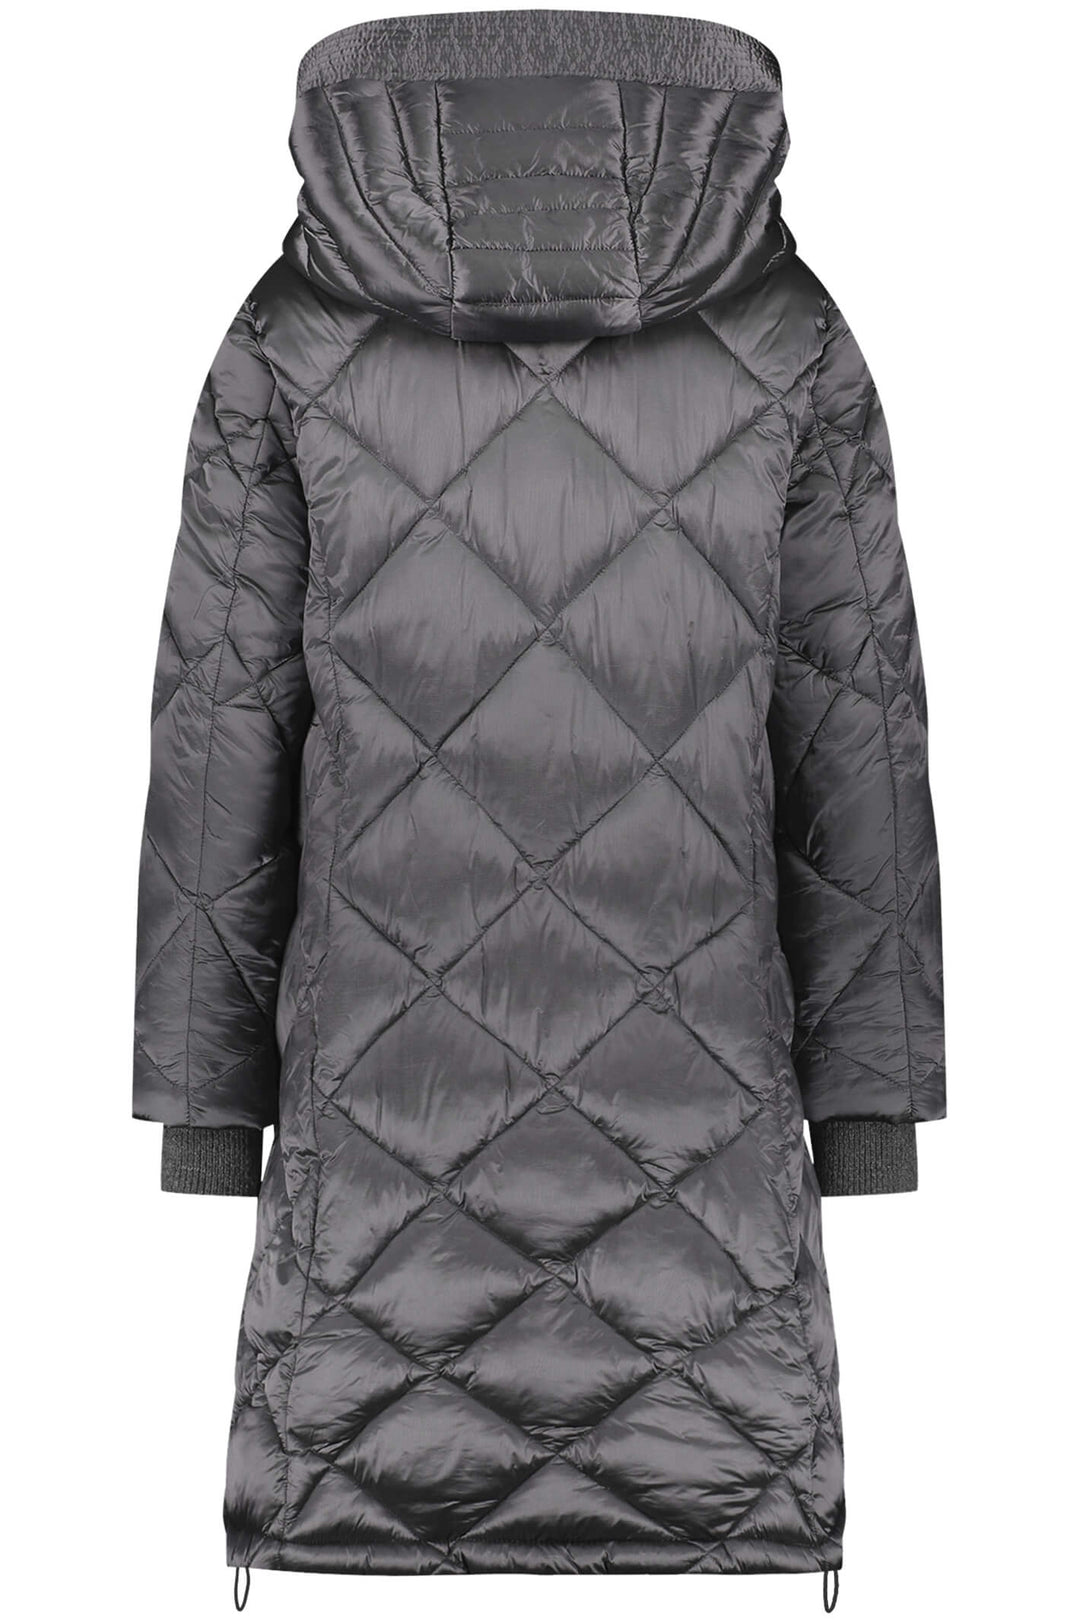 Gerry Weber 250240 Anthracite Diamond Quilt Padded Coat - Experience Boutique